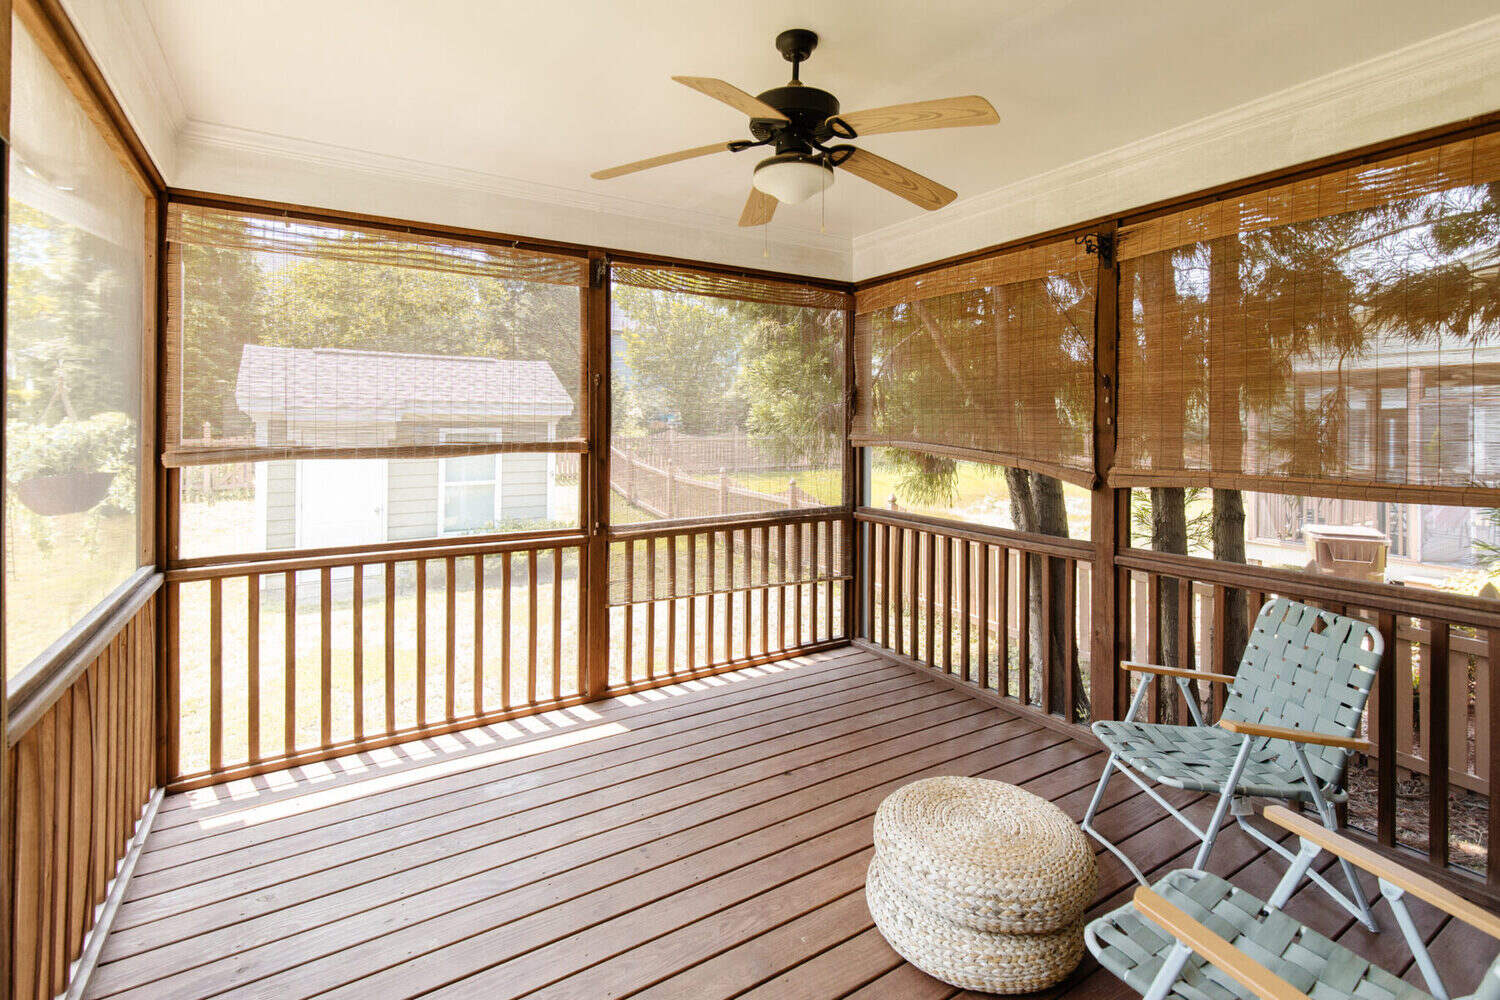 How To Cool Down A Screened-In Porch